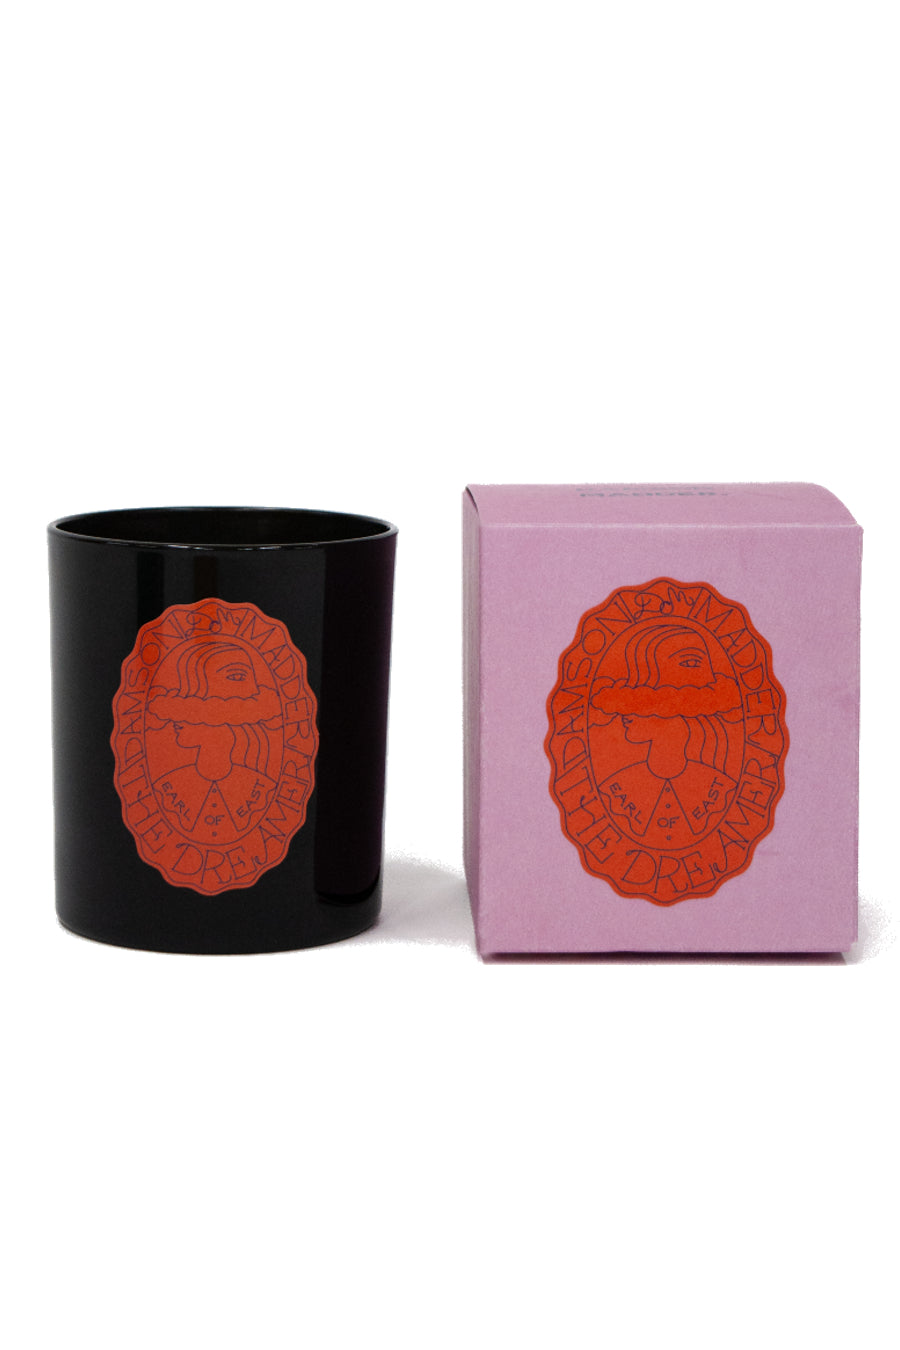 earl of east x damson madder candle - the dreamer